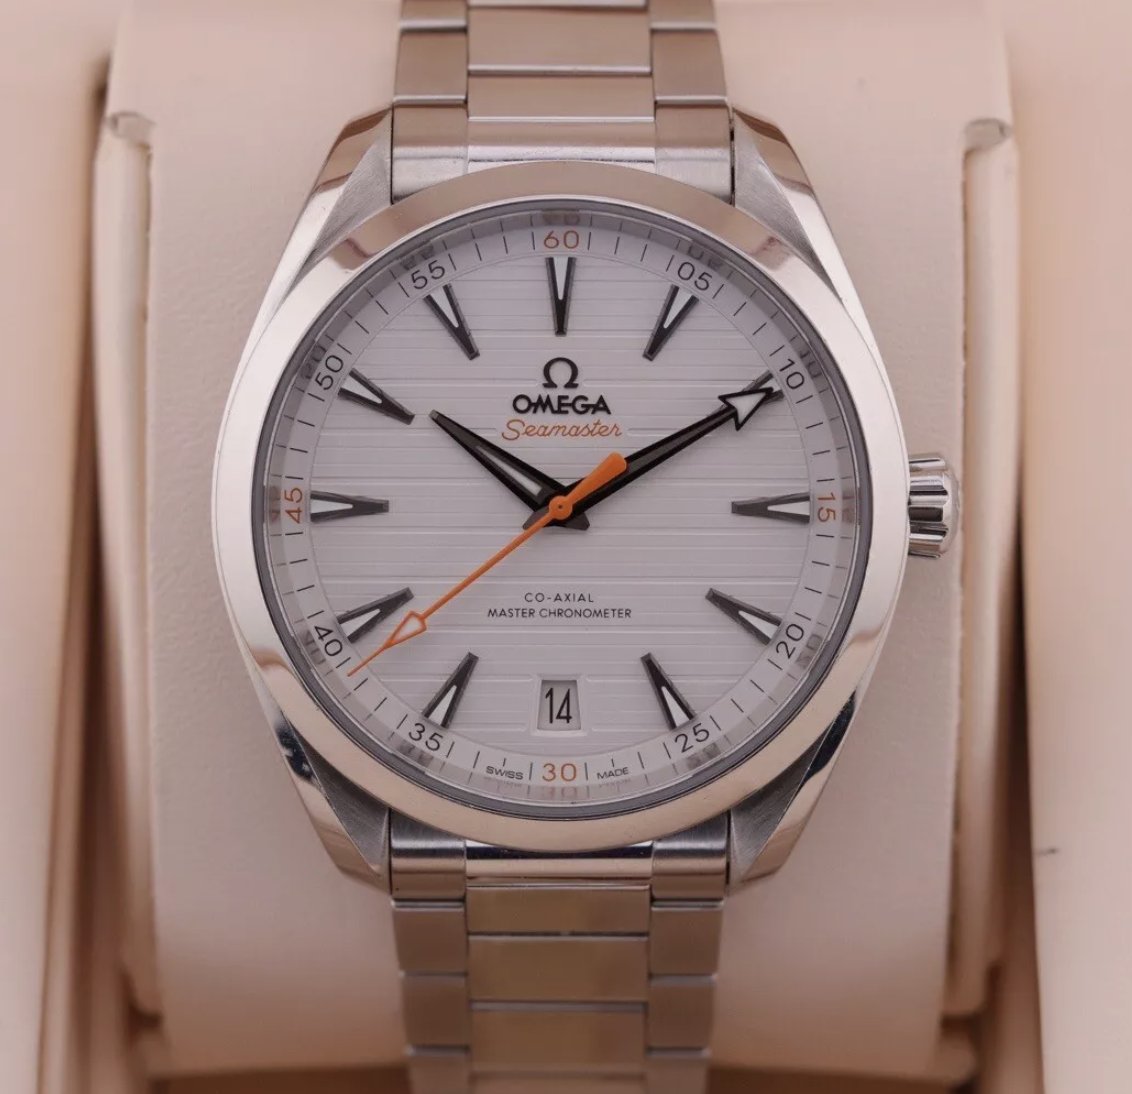 Omega Seamaster Aqua Terra Silver Dial Men's watch 41mm 220.10.41.21.02.001

For sale by @_horology101_

$4,150

#omega  #watches #valueyourwatch #watchmarketplace #luxury #luxurylife #entrereneur #luxurywatch #luxurywatches #luxurydesign #businesswatch #watchfam